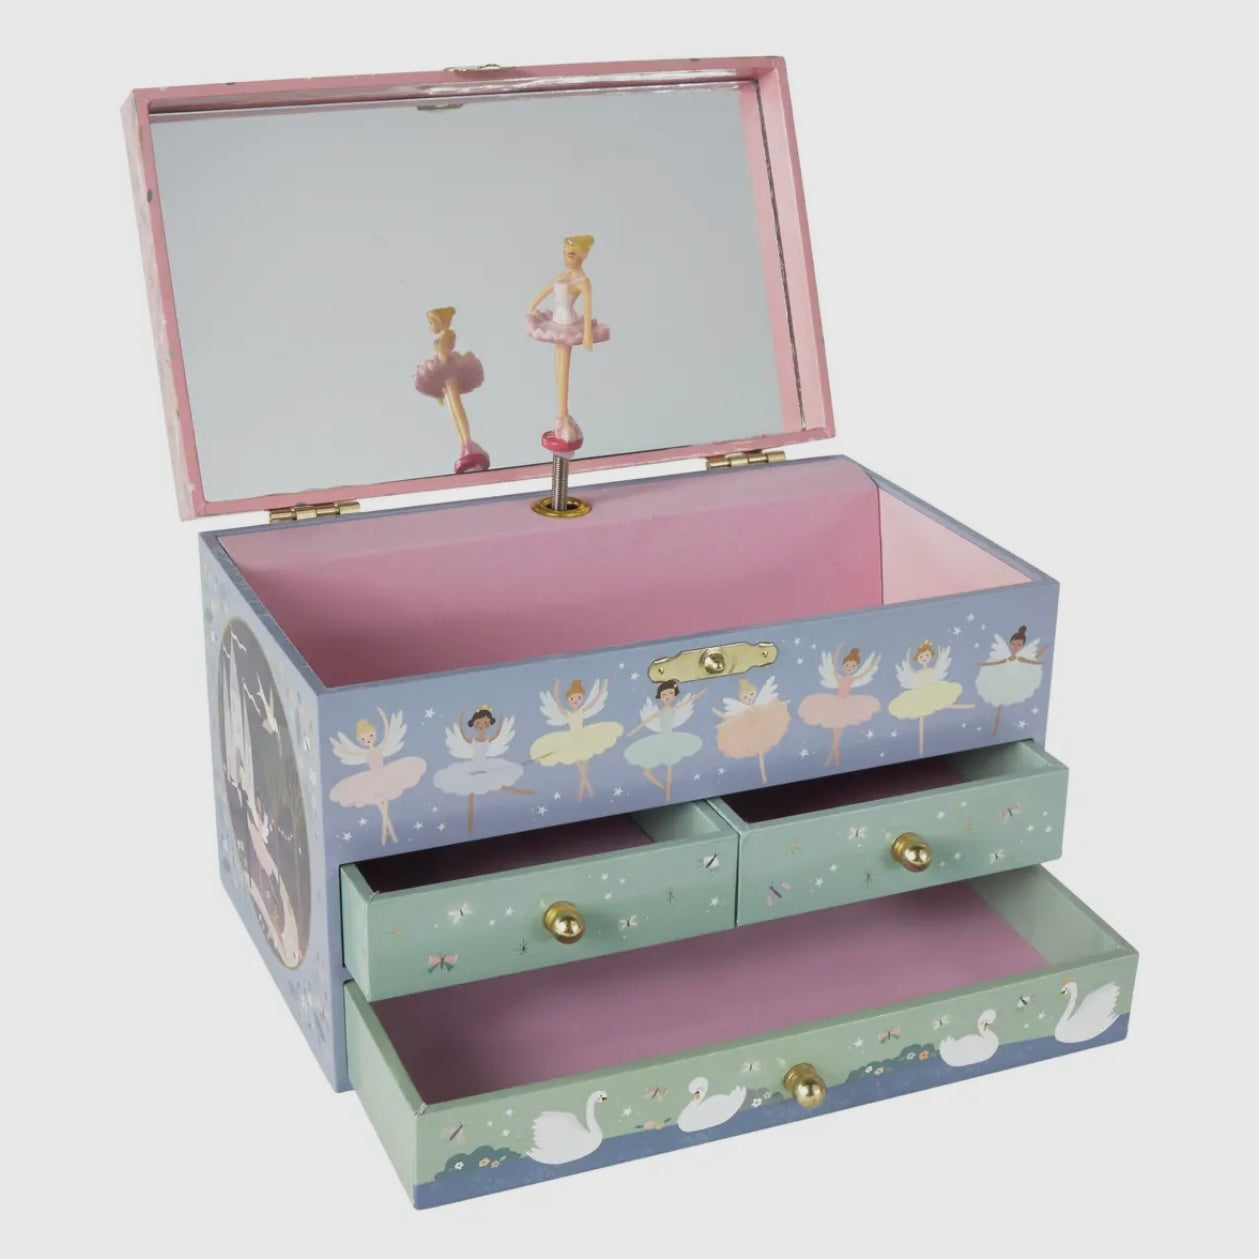 Enchanted Musical Jewelry Box